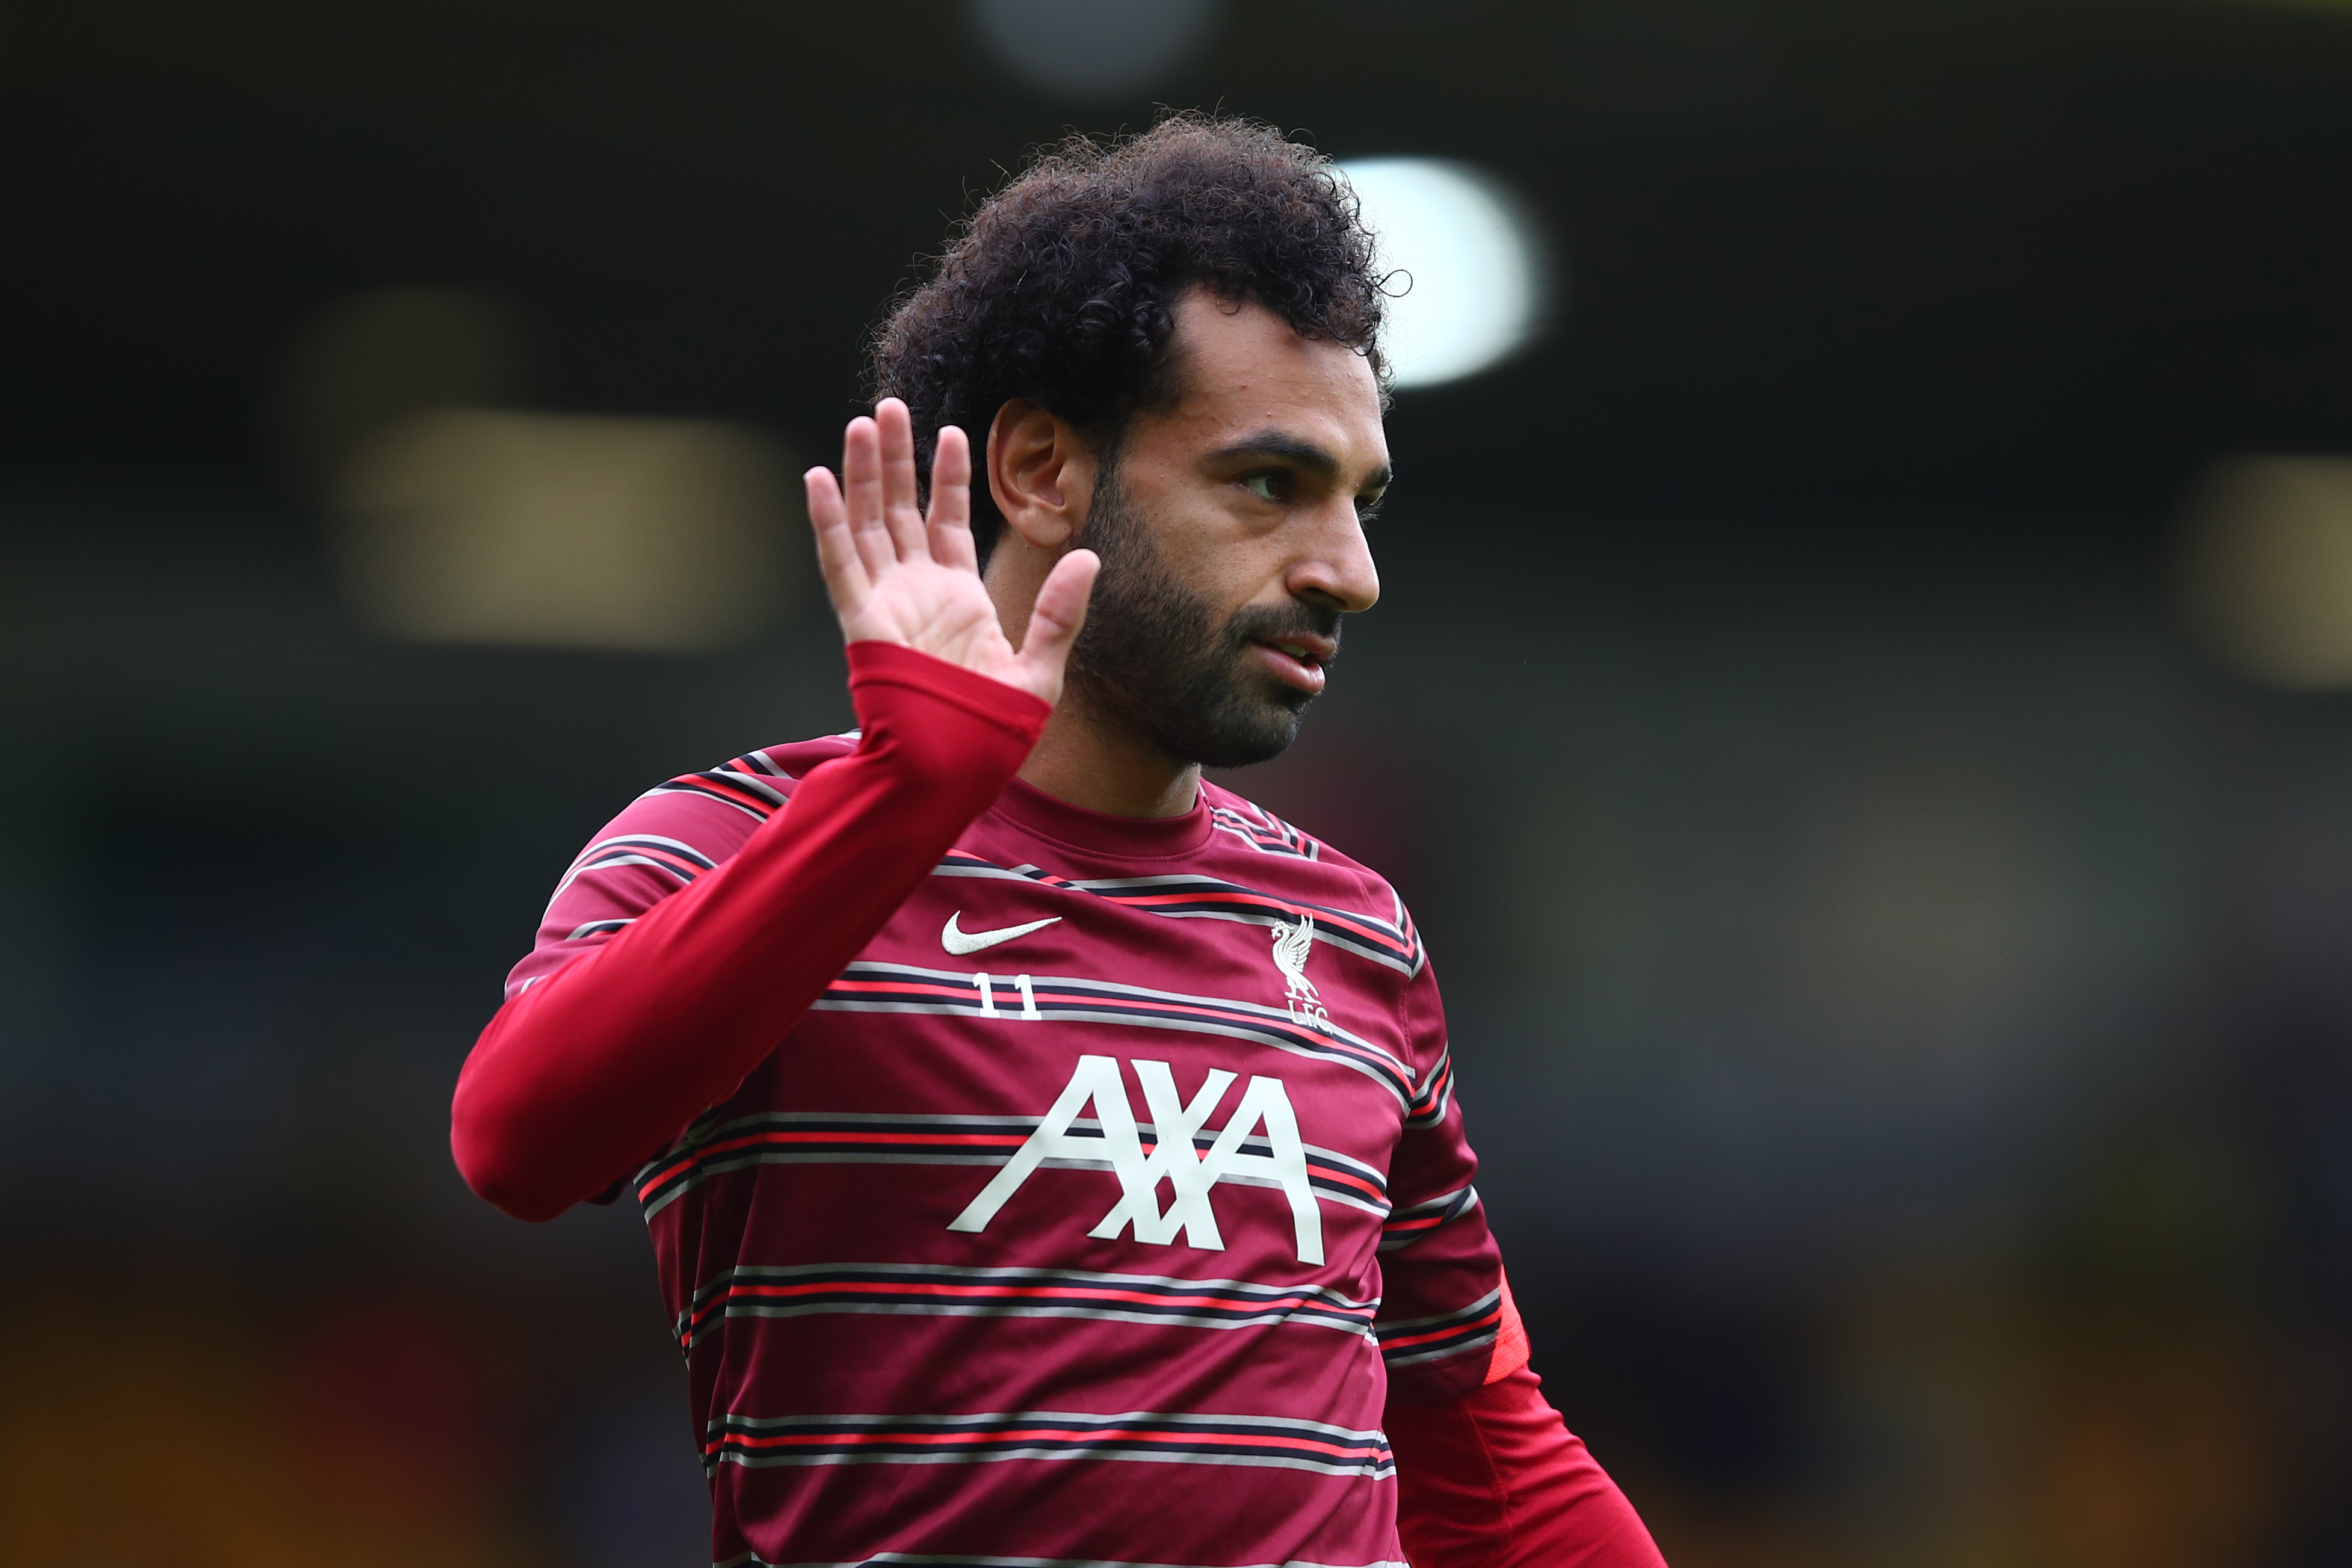 ‘Where would you go now?’ – Ex-Red questions why Mo Salah would want to leave Liverpool as Egyptian King still yet to sign new Anfield deal